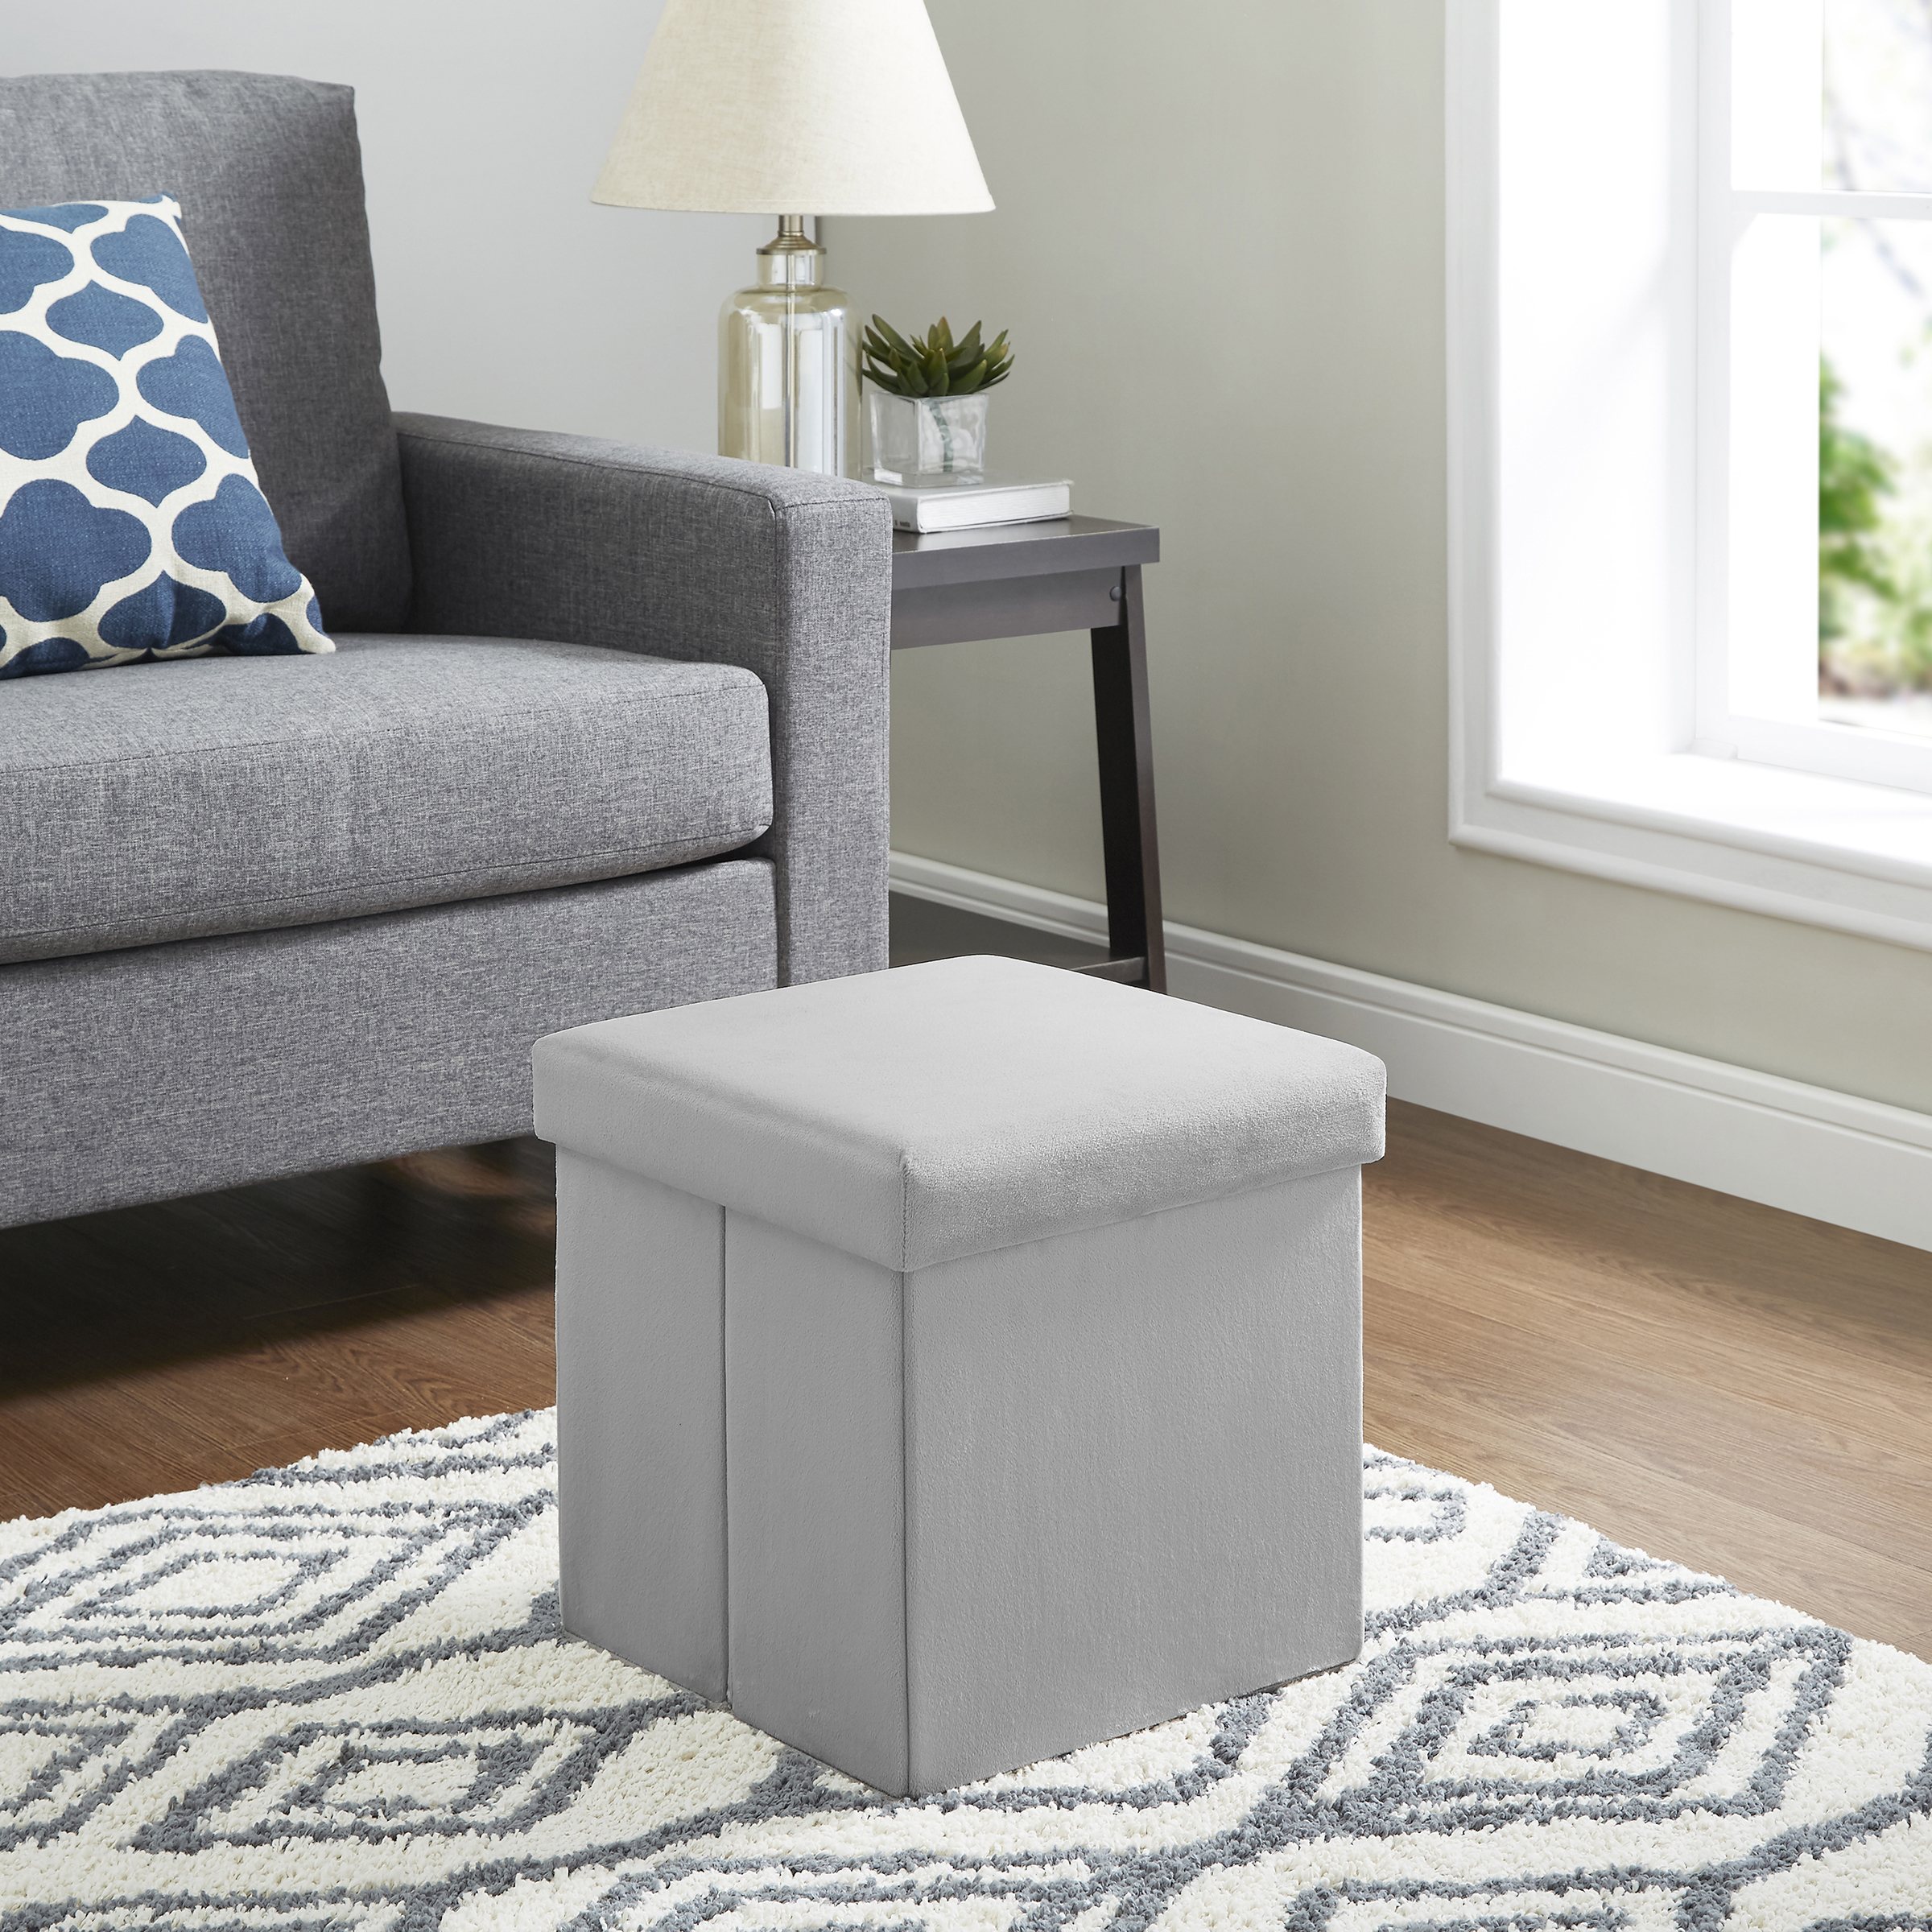 Mainstays Ultra Collapsible Storage Ottoman, Gray Faux Suede - image 4 of 6